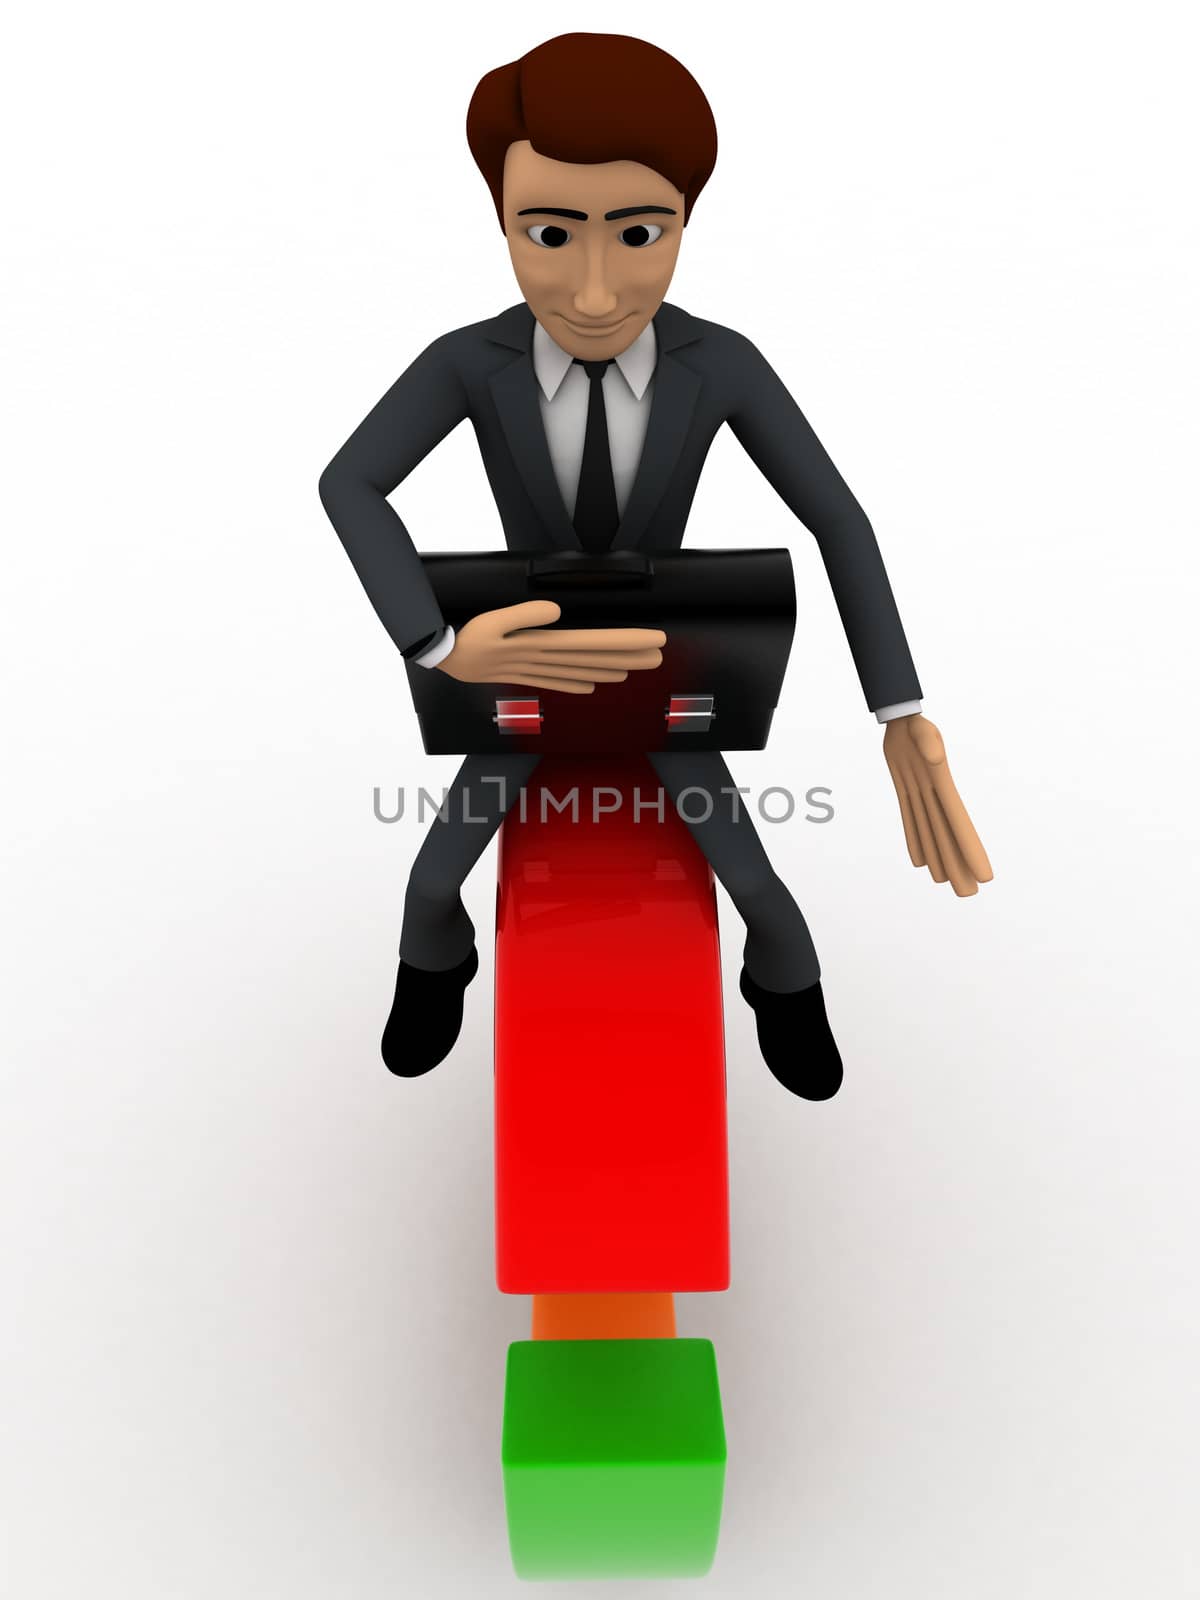 3d man sitting on circle with briefcase going to office concept by touchmenithin@gmail.com